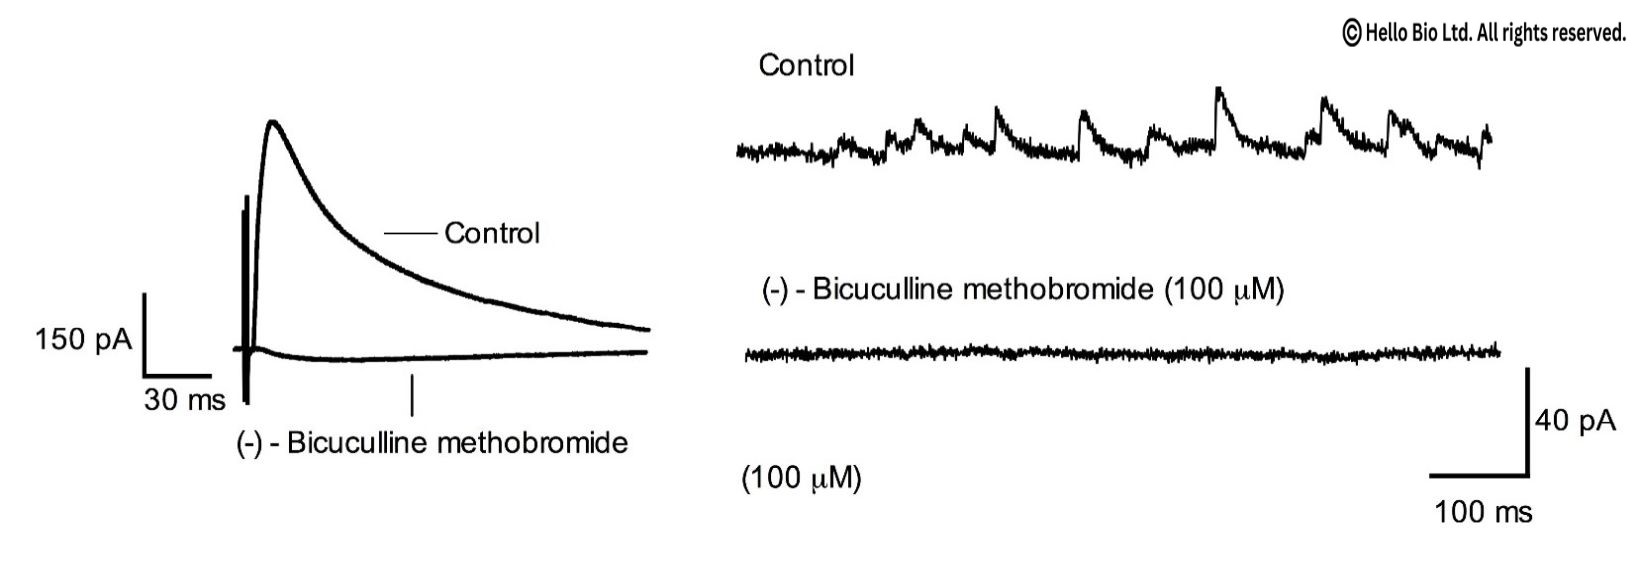 Figure 1. Bicuculline methobromide inhibition of evoked and spontaneous GABAA-R mediated IPSCs in mouse cortical neurons